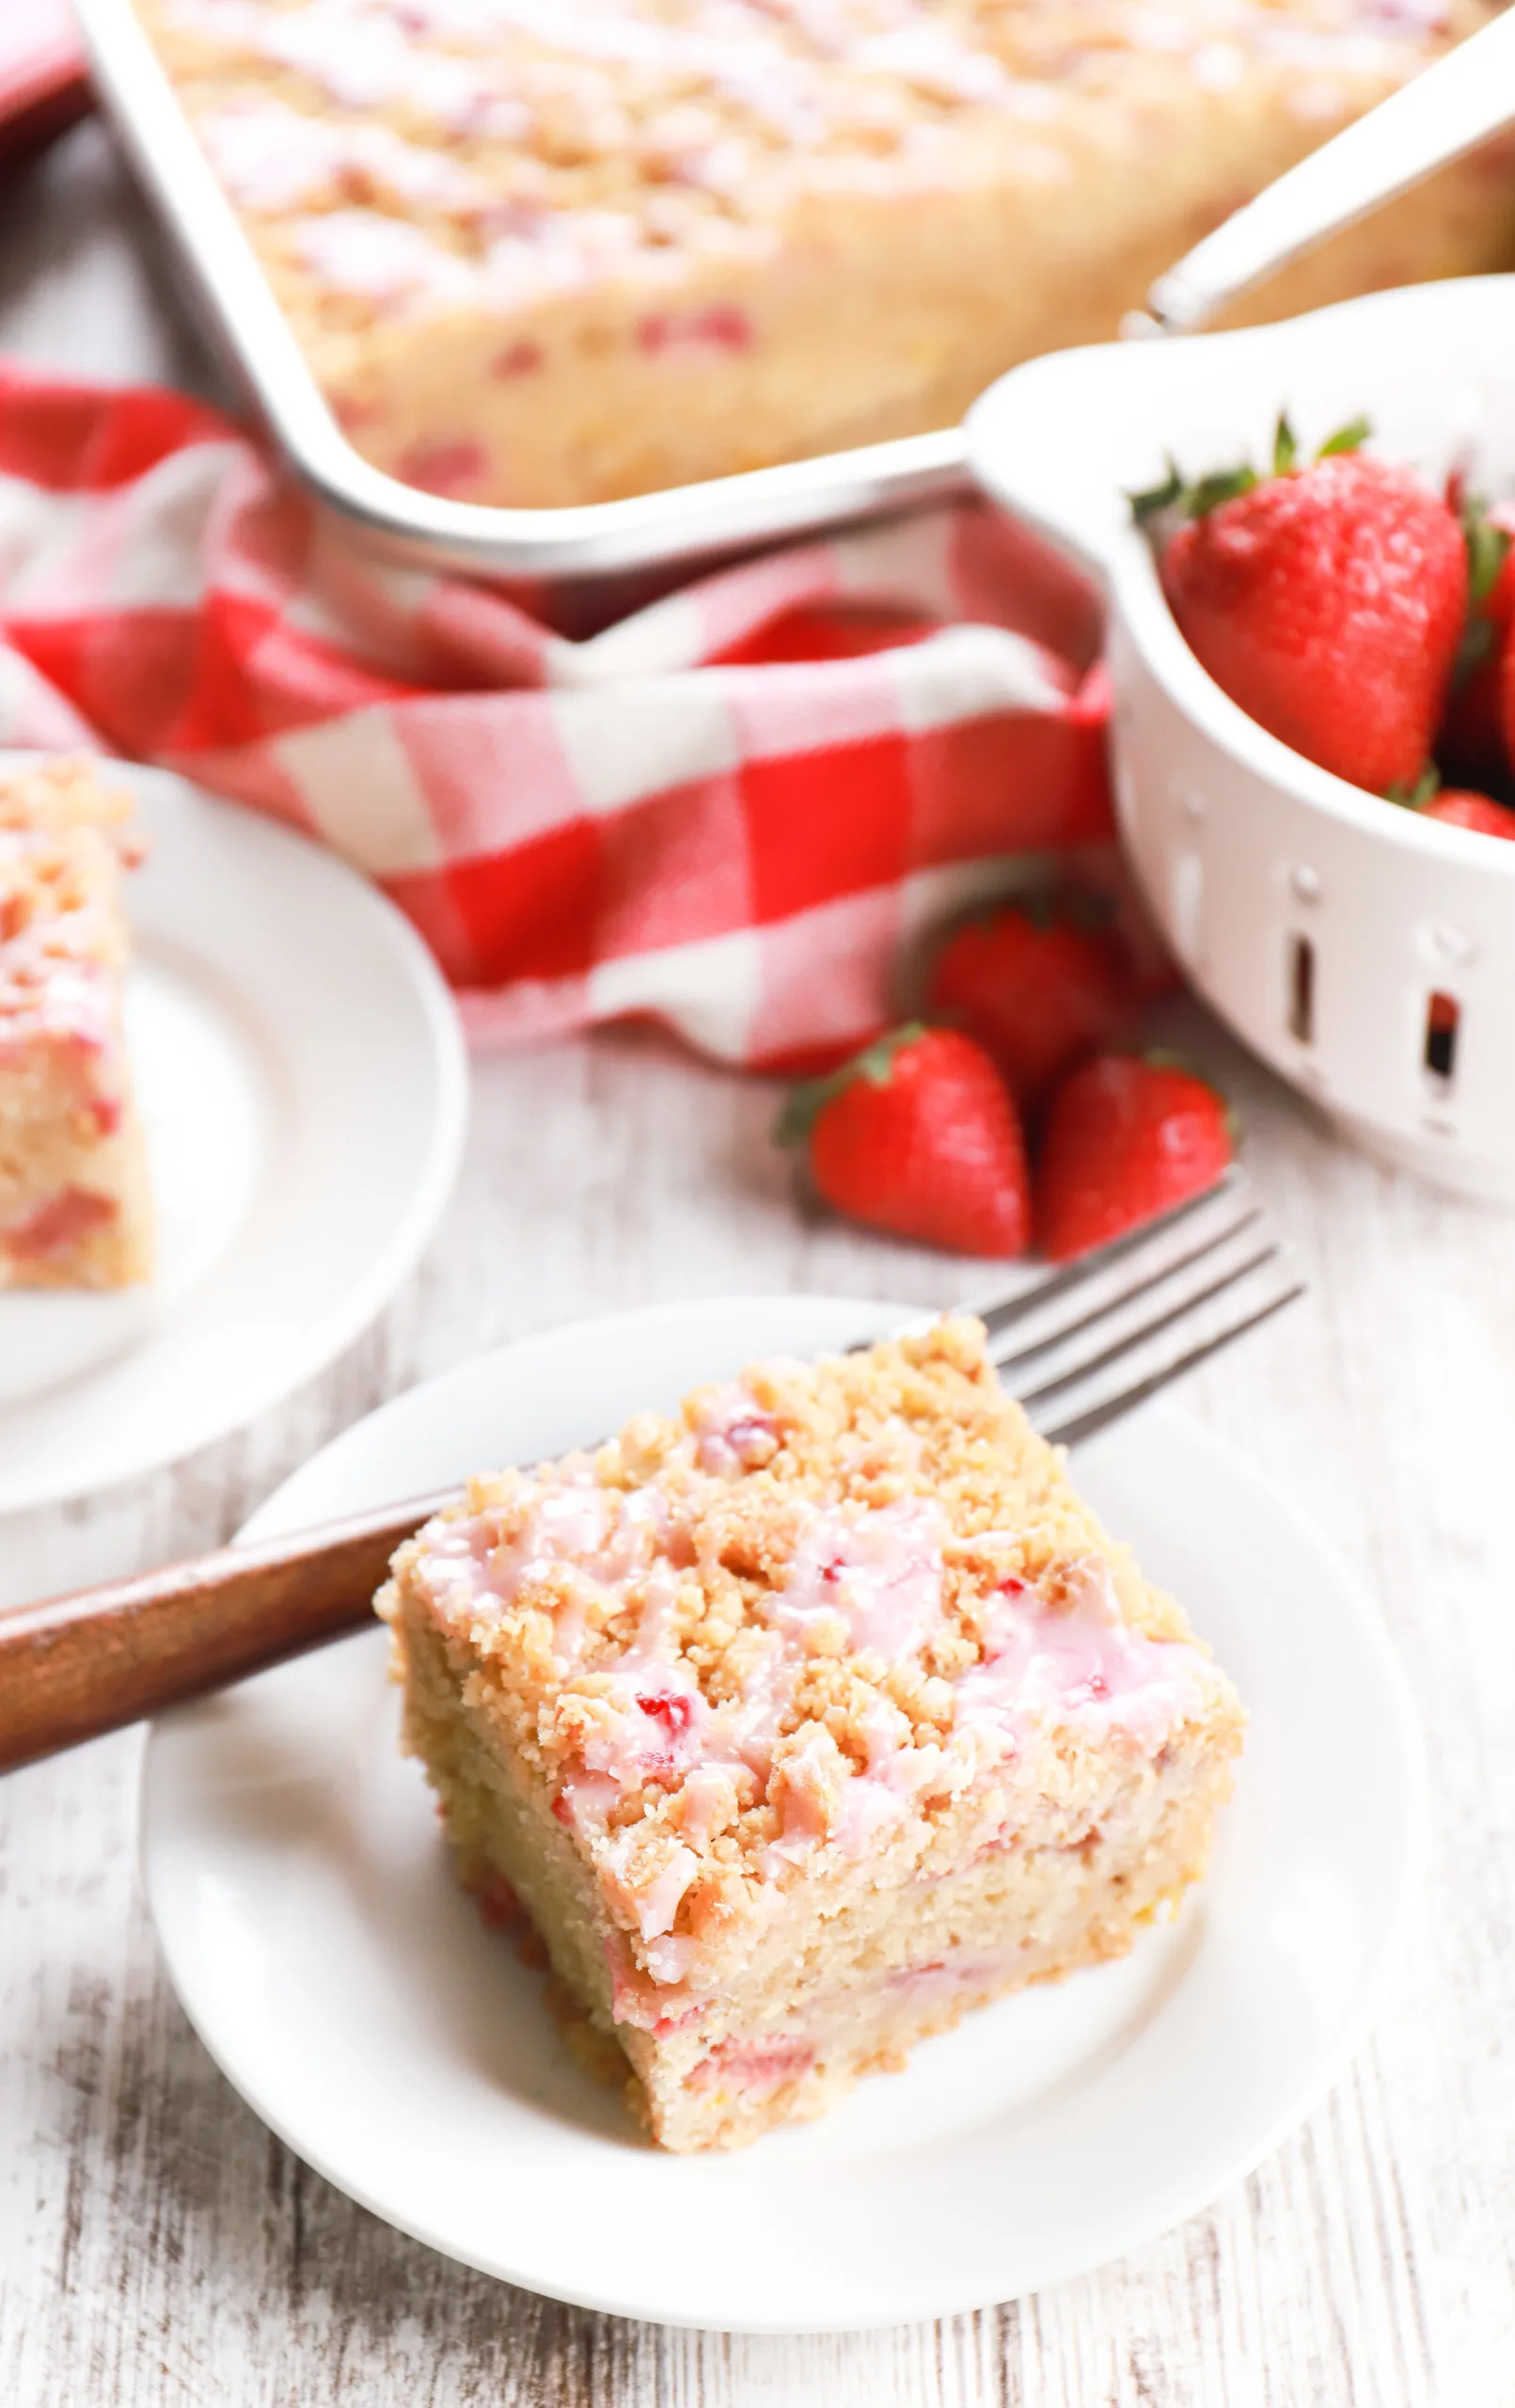 Piece of strawberry rhubarb coffee cake on a small white plate with a small white colander of strawberries and remaining coffee cake in the background.